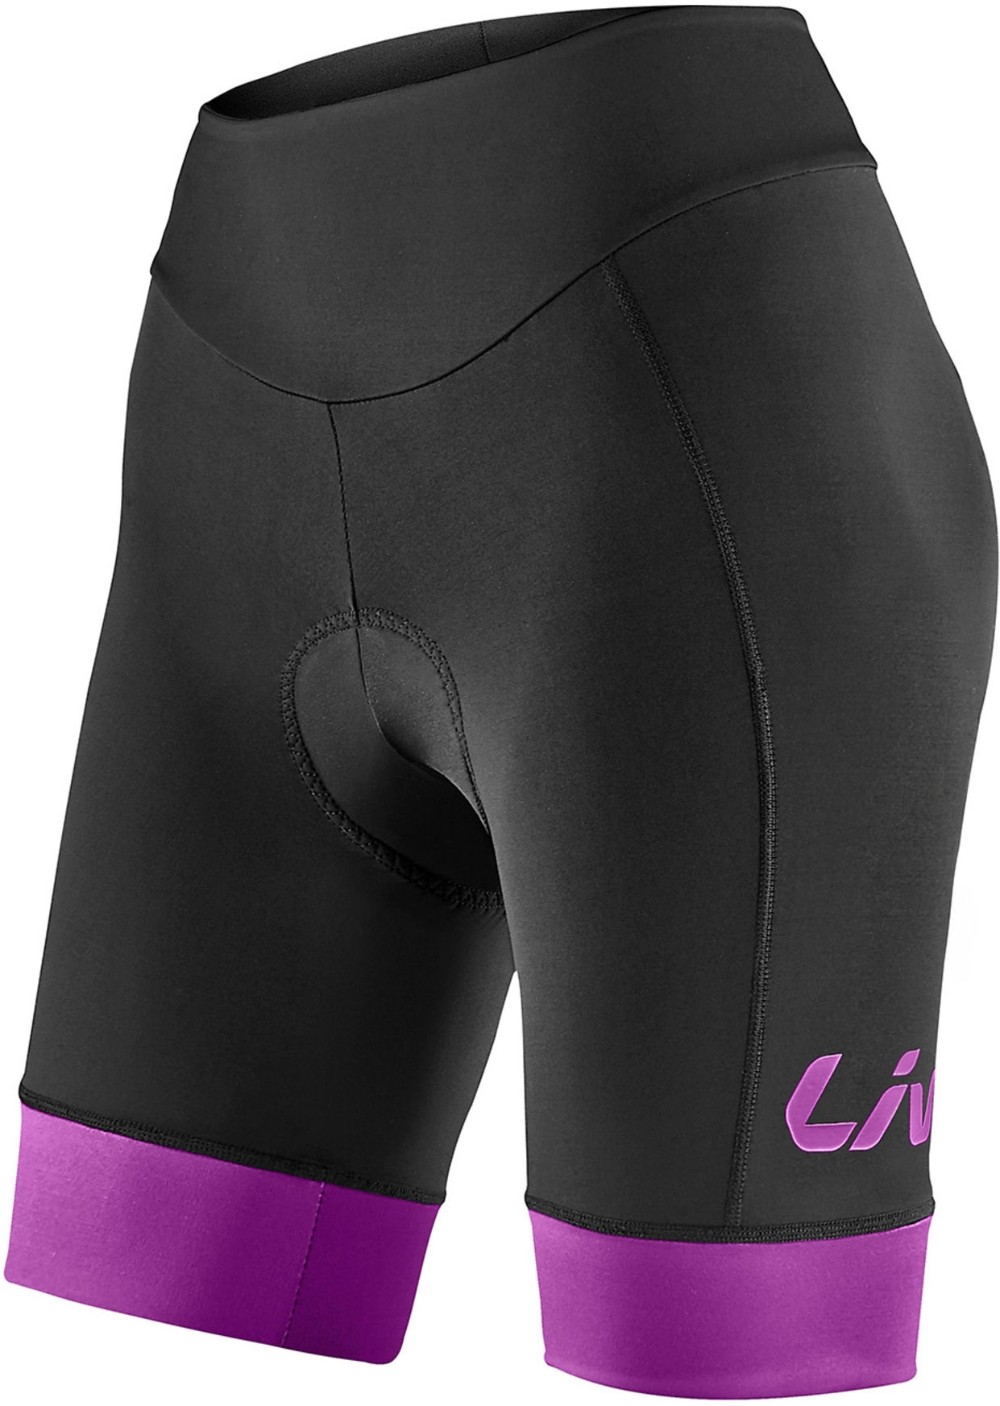 Race Day Womens Shorts image 0